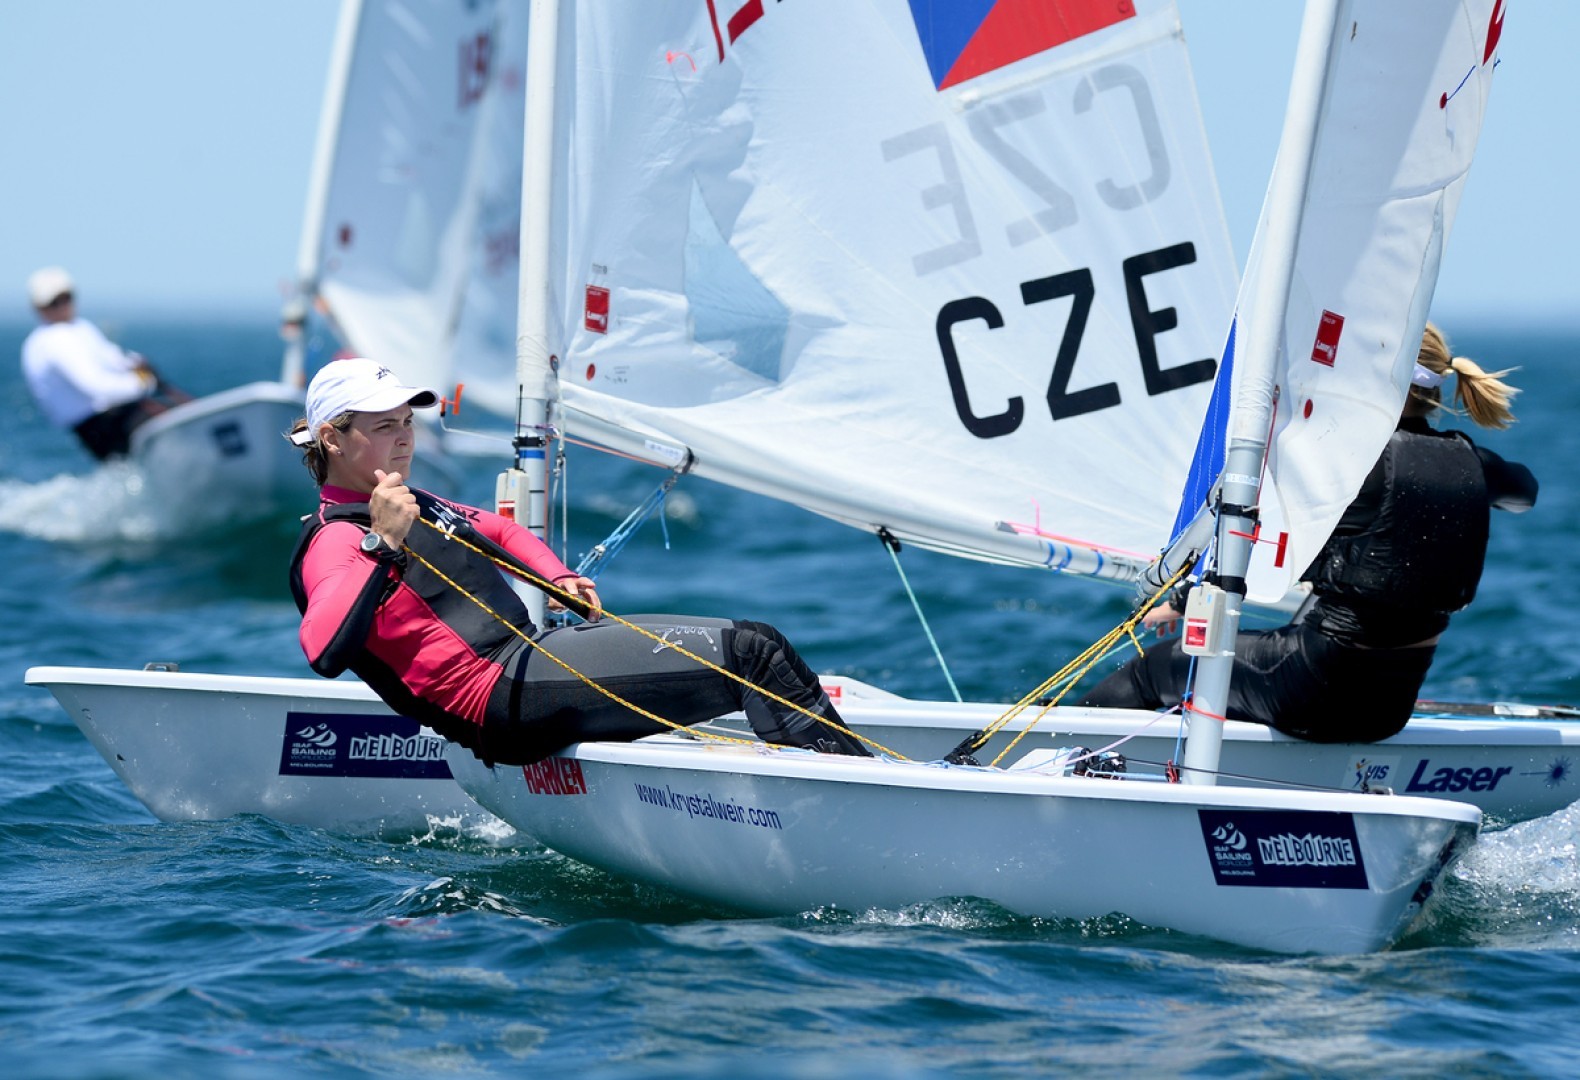 Steering the Course 2022 to shine the spotlight on the opportunities
for women in sailing